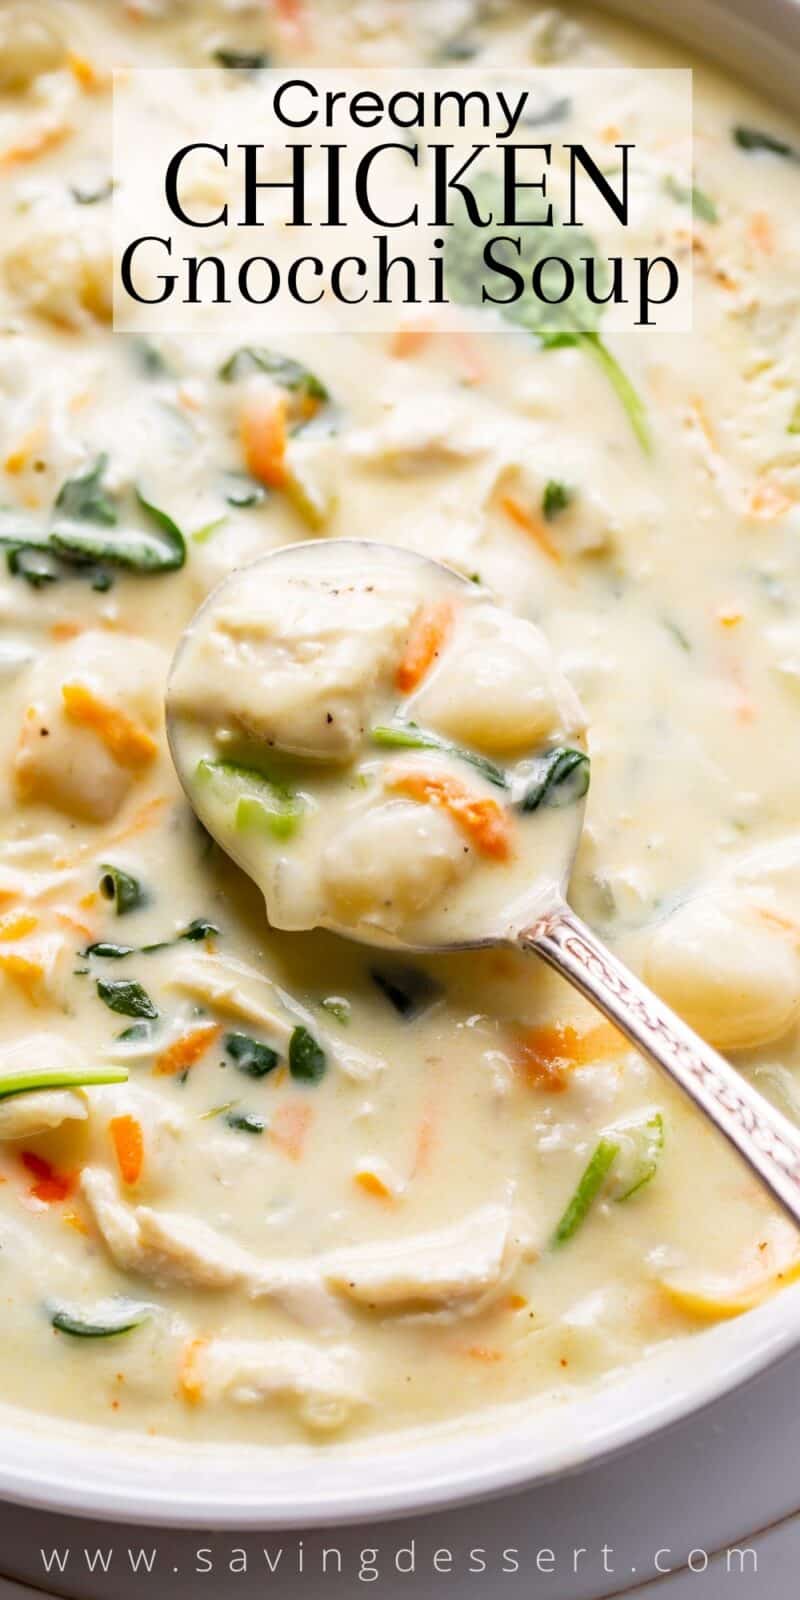 Closeup of a bowl of creamy chicken, spinach and gnocchi soup